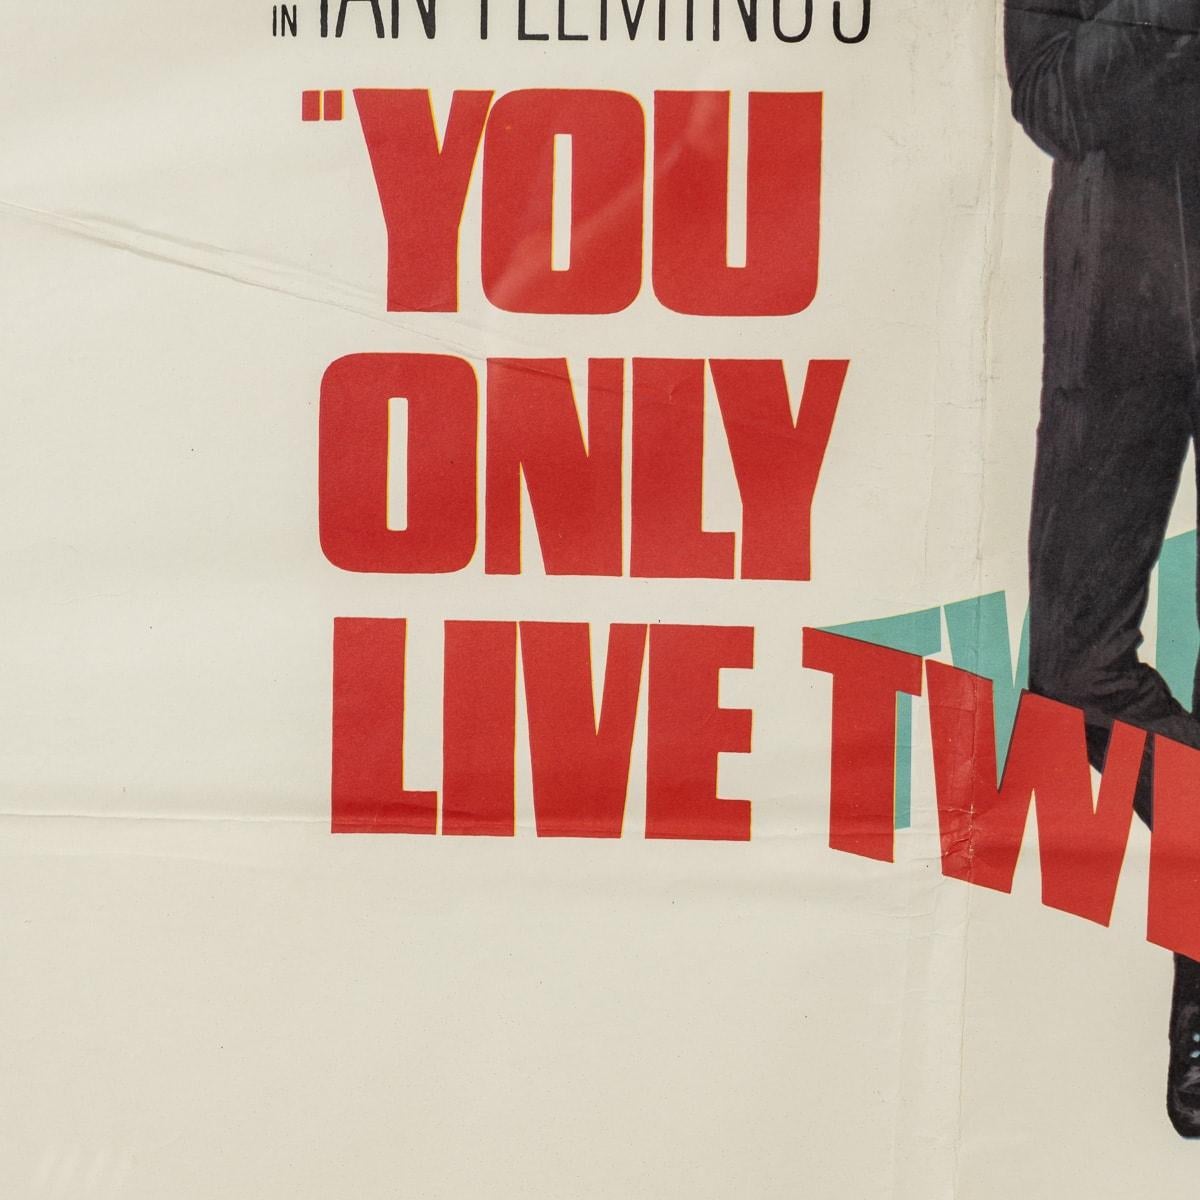 Original U.S Release James Bond 007 'You Only Live Twice' Subway C Poster c.1967 In Good Condition For Sale In Royal Tunbridge Wells, Kent